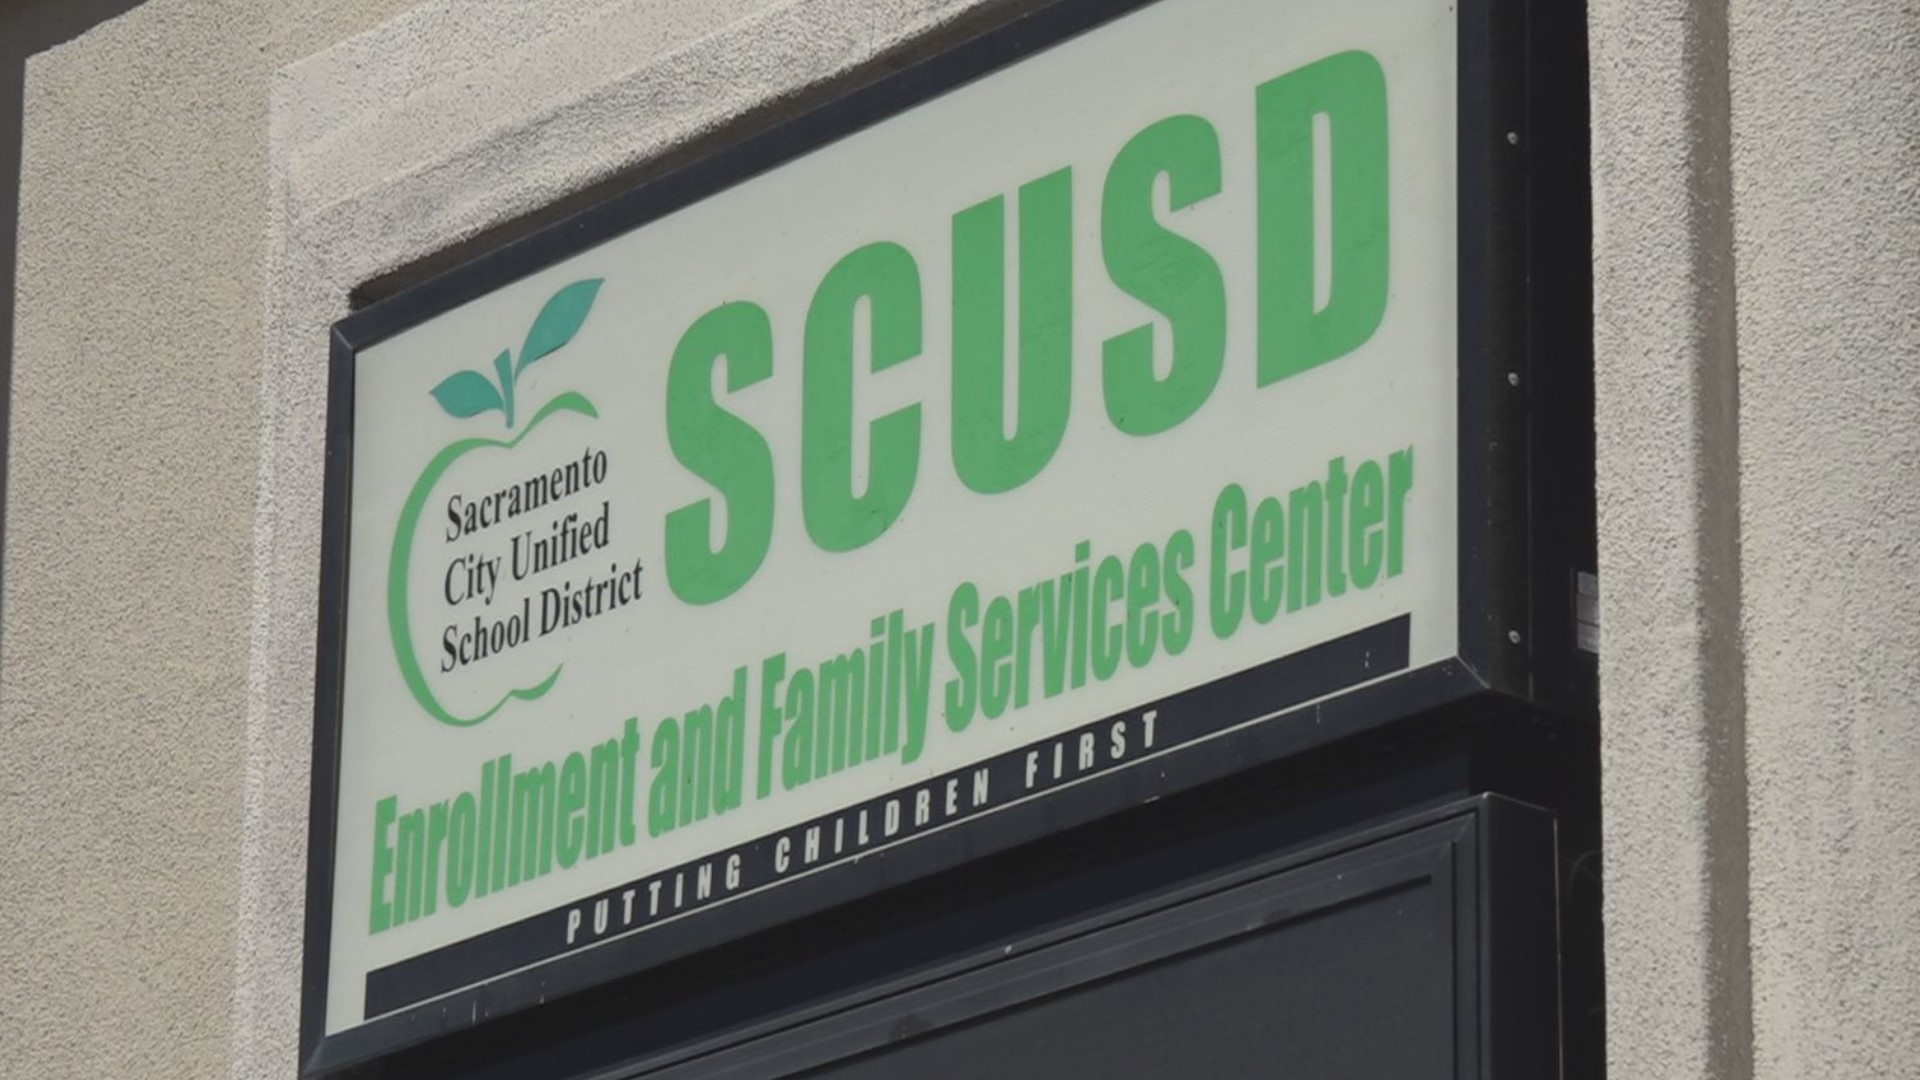 The district says the plan is an opportunity for the SCUSD to avoid $47 million in penalties for not meeting the required number of instructional days in 21-22 year.